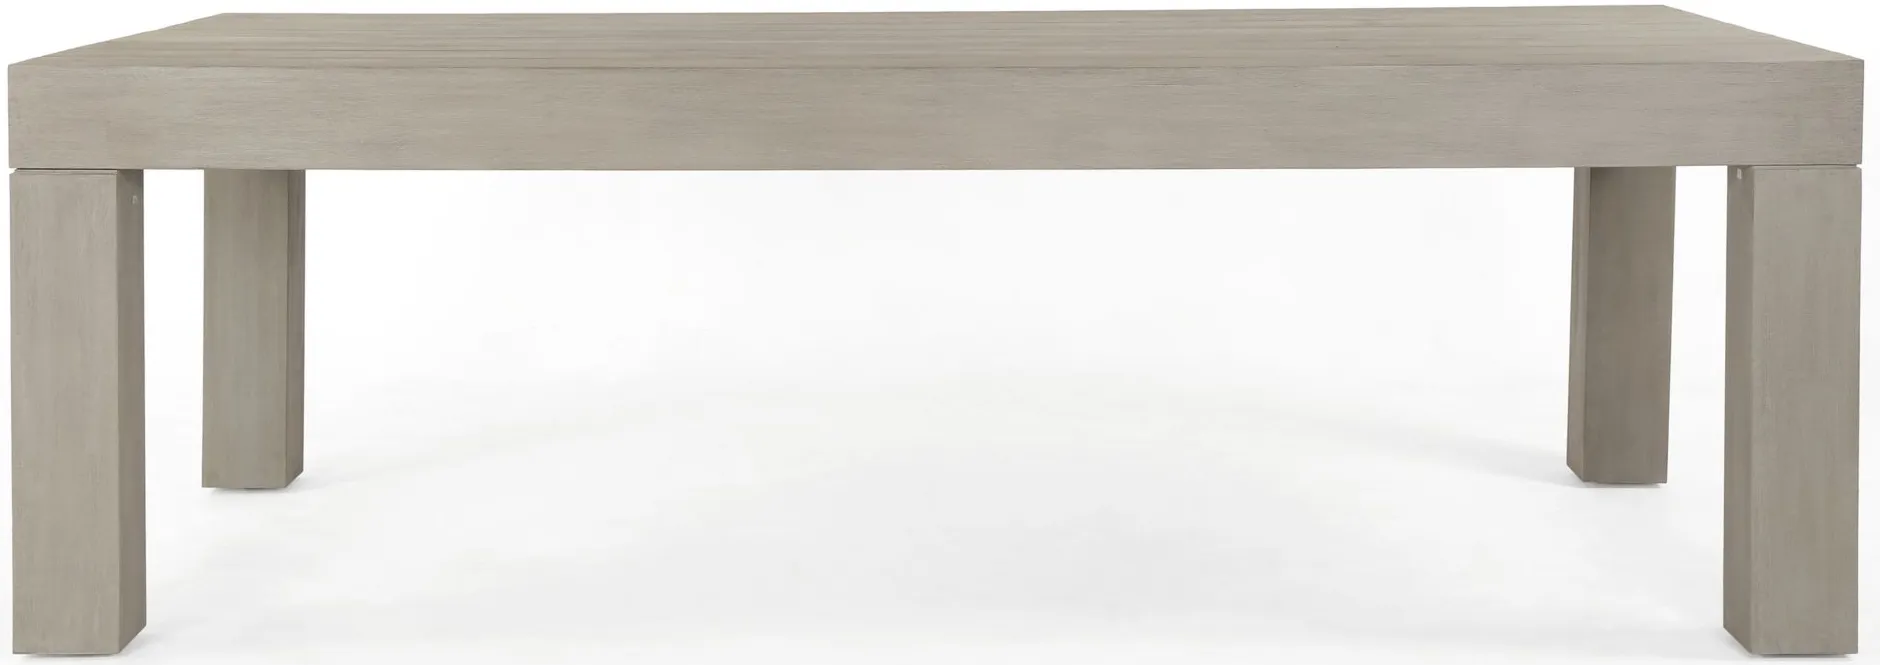 Sonora Outdoor Dining Table in Weathered Gray by Four Hands